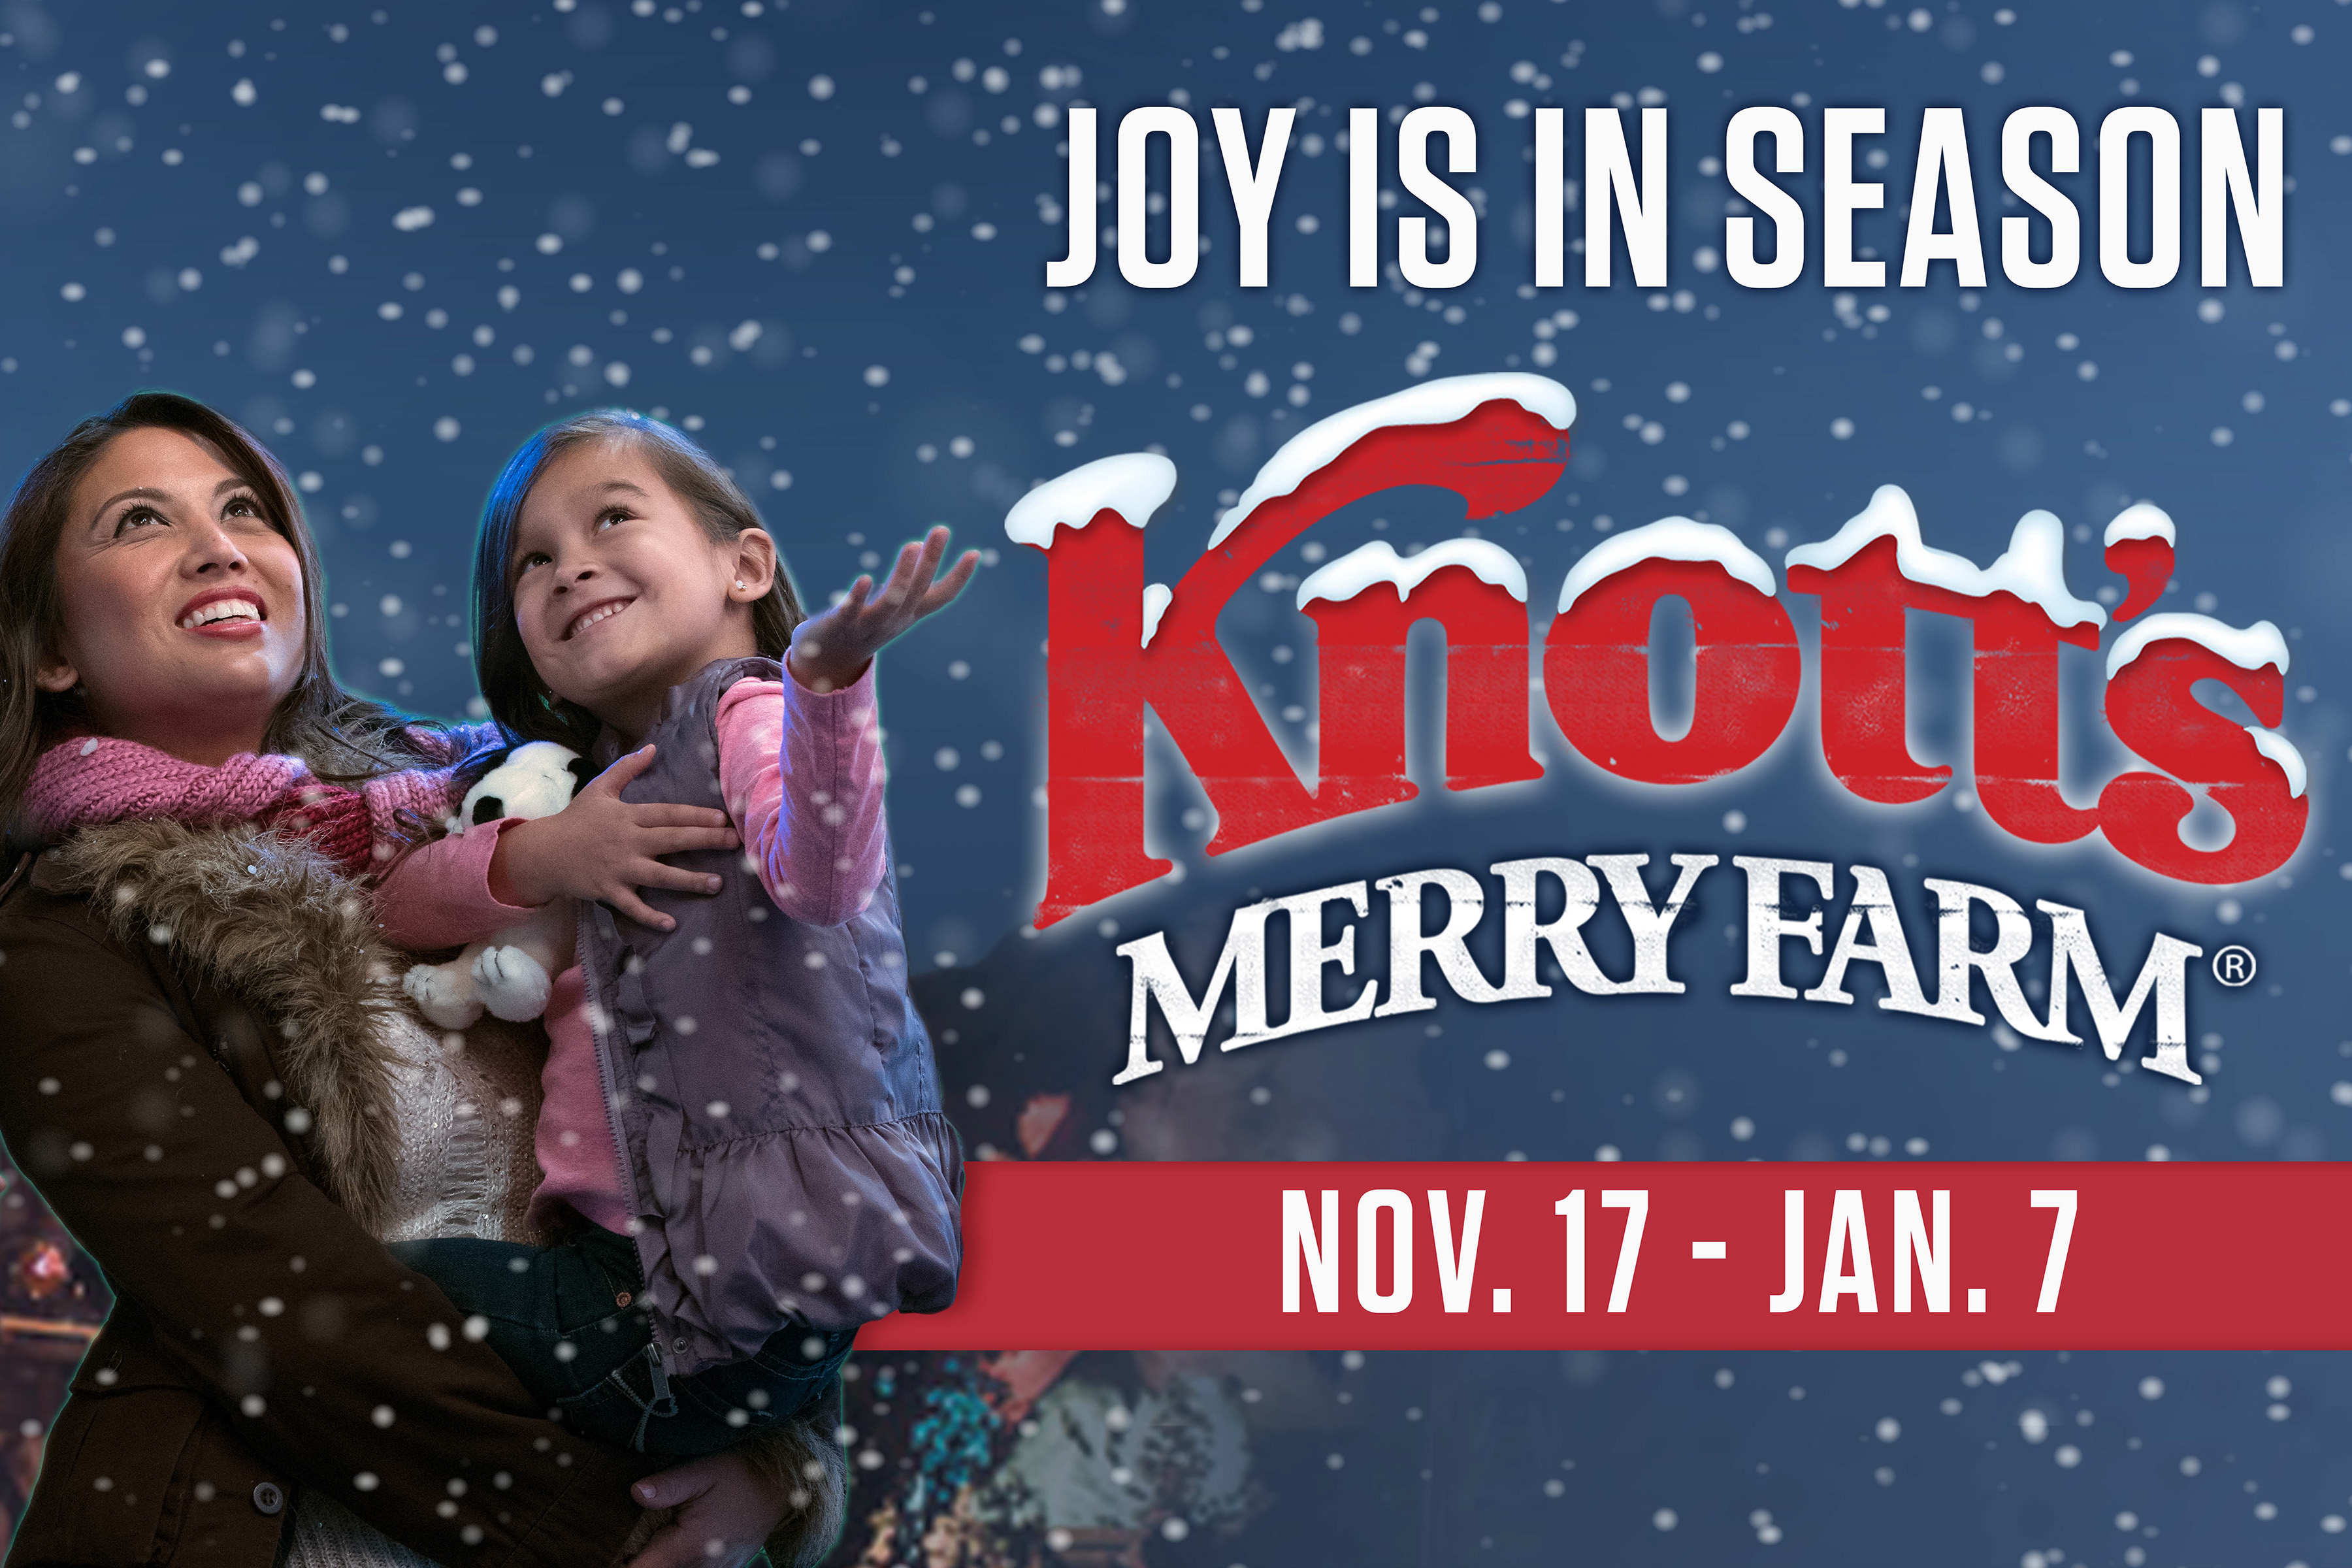 Knott’s Merry Farm 2017 Brings Back Festive Favorites and New Food